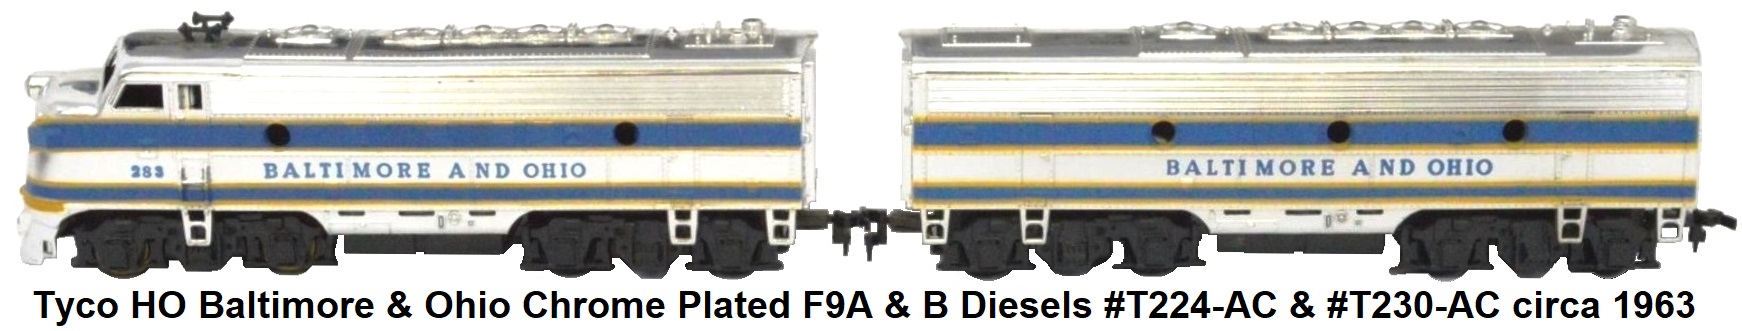 Tyco HO Baltimore & Ohio special chrome plated F9A & B diesels #T224-AC & #T230-AC circa 1963